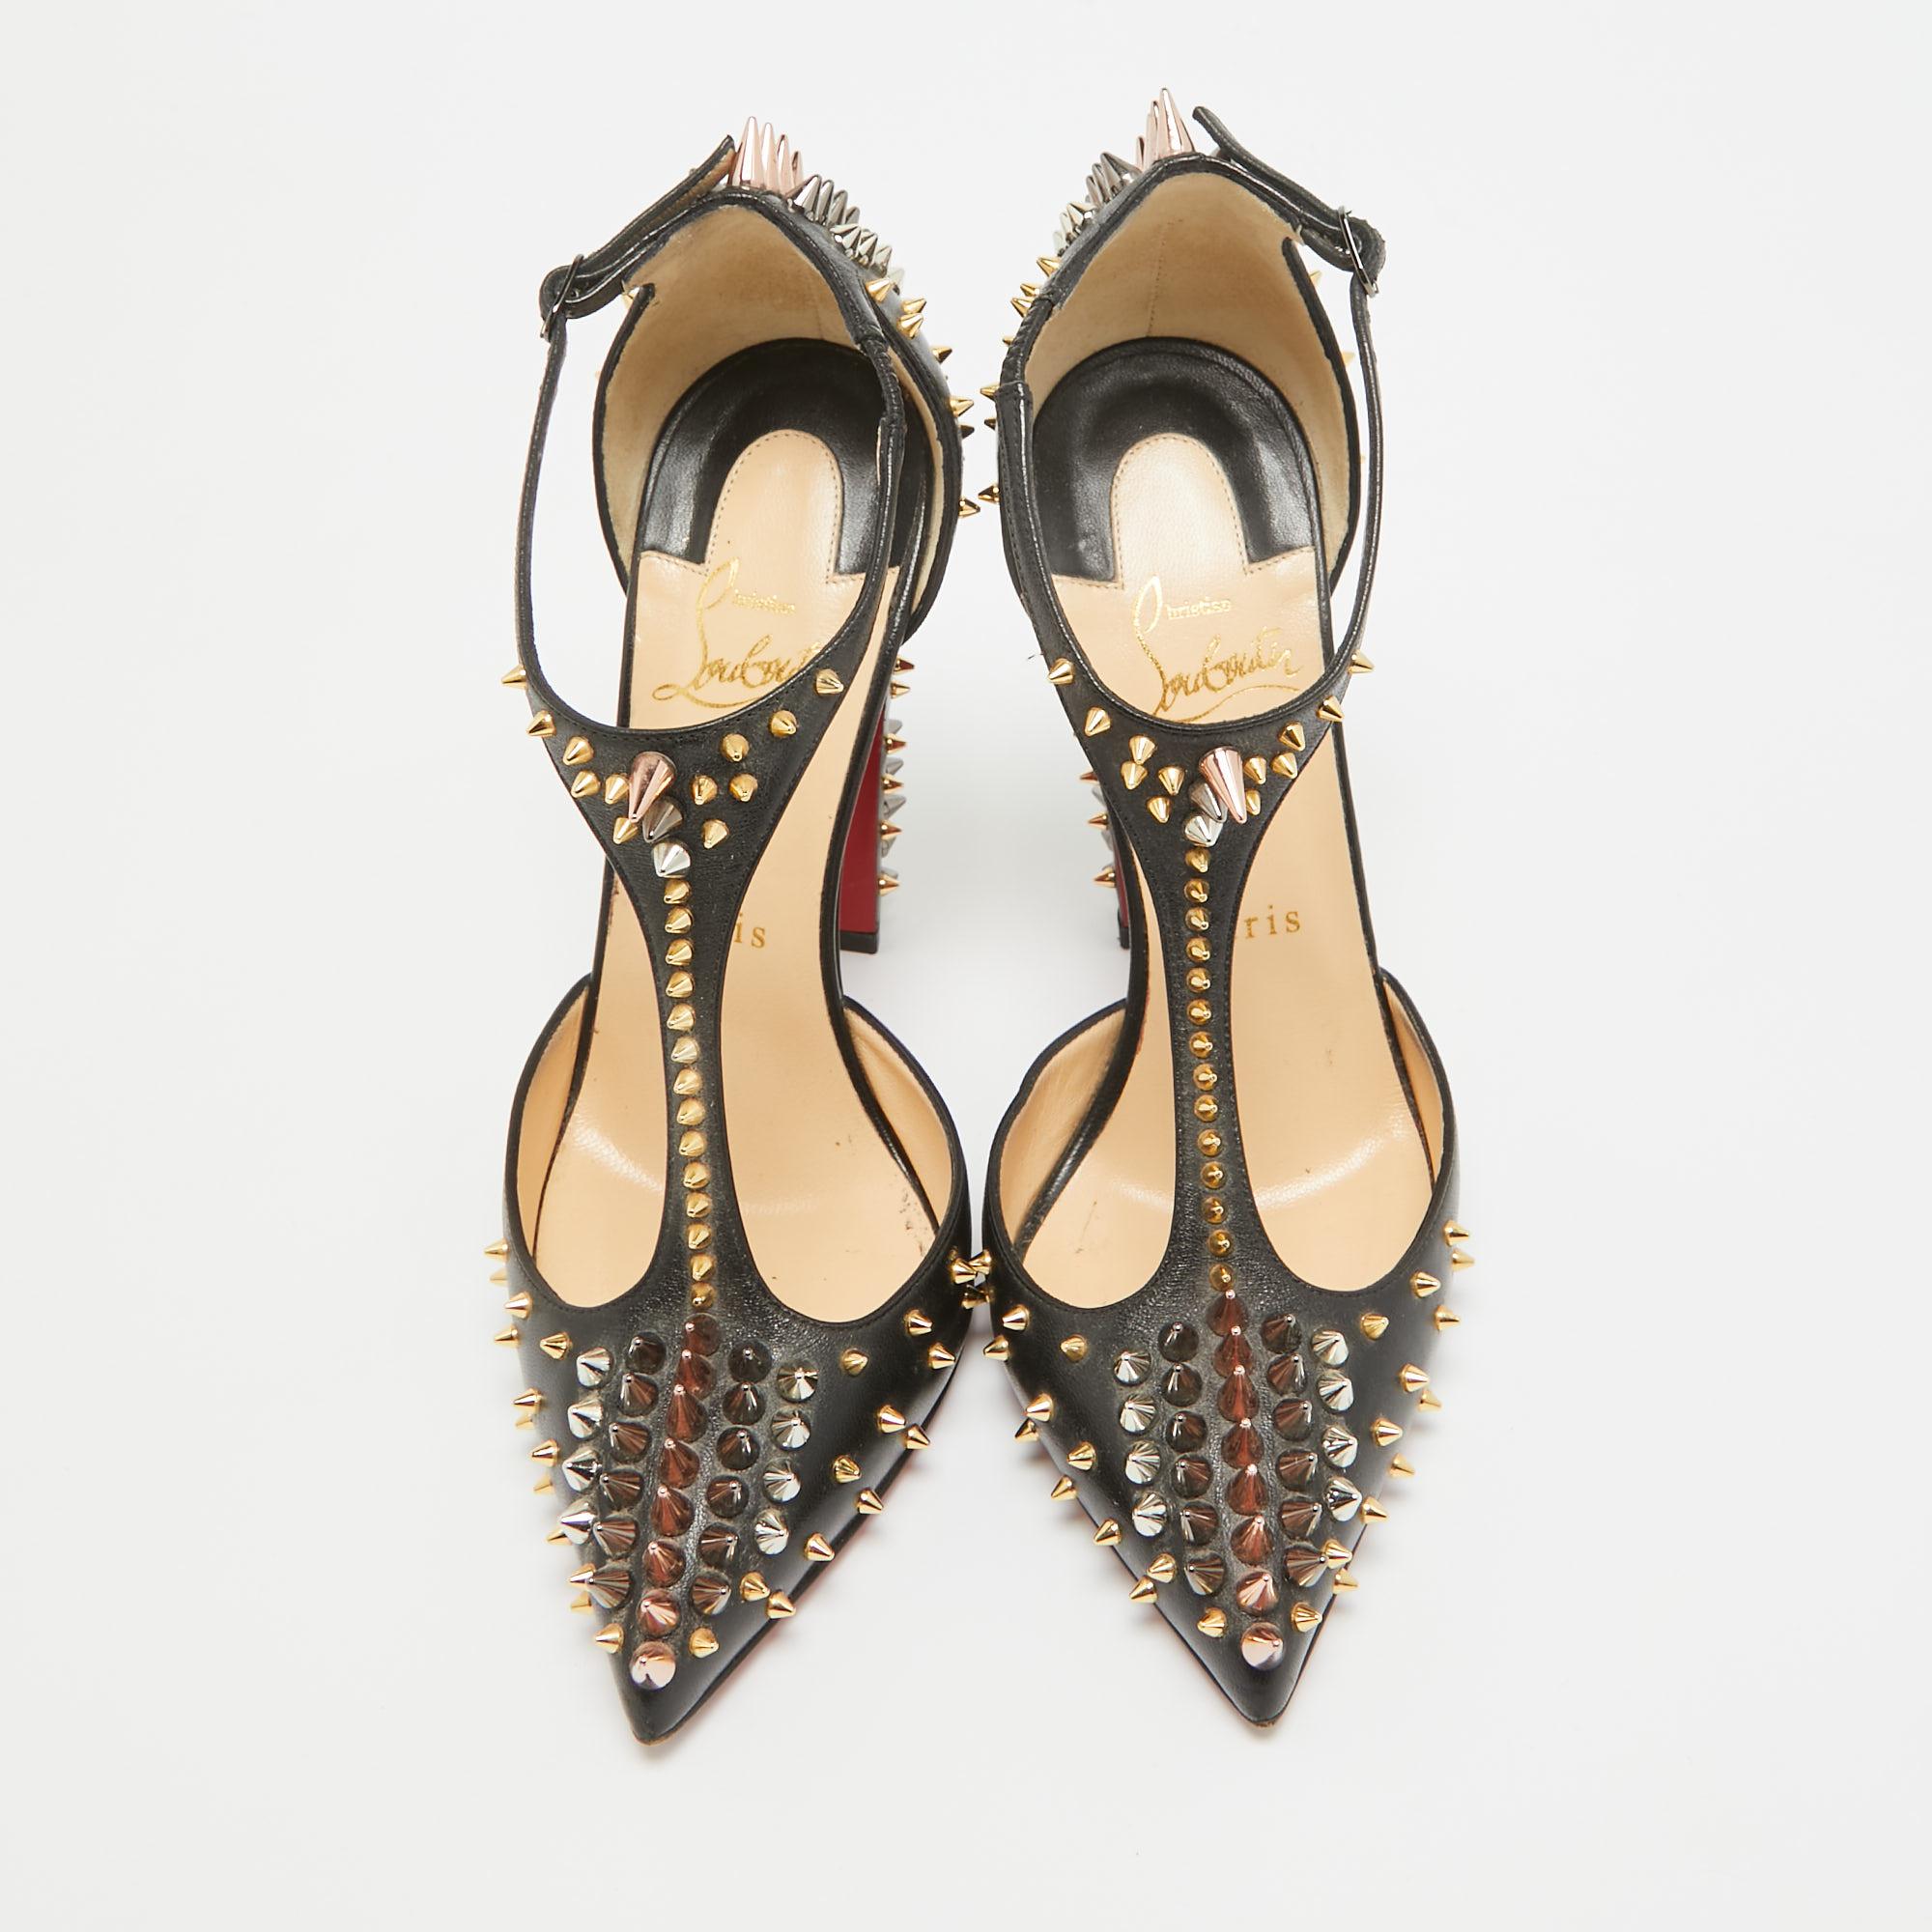 Discover footwear elegance with these Christian Louboutin women's pumps. Meticulously designed, these heels marry fashion and comfort, ensuring you shine in every setting.

CHRISTIAN LOUBOUTIN